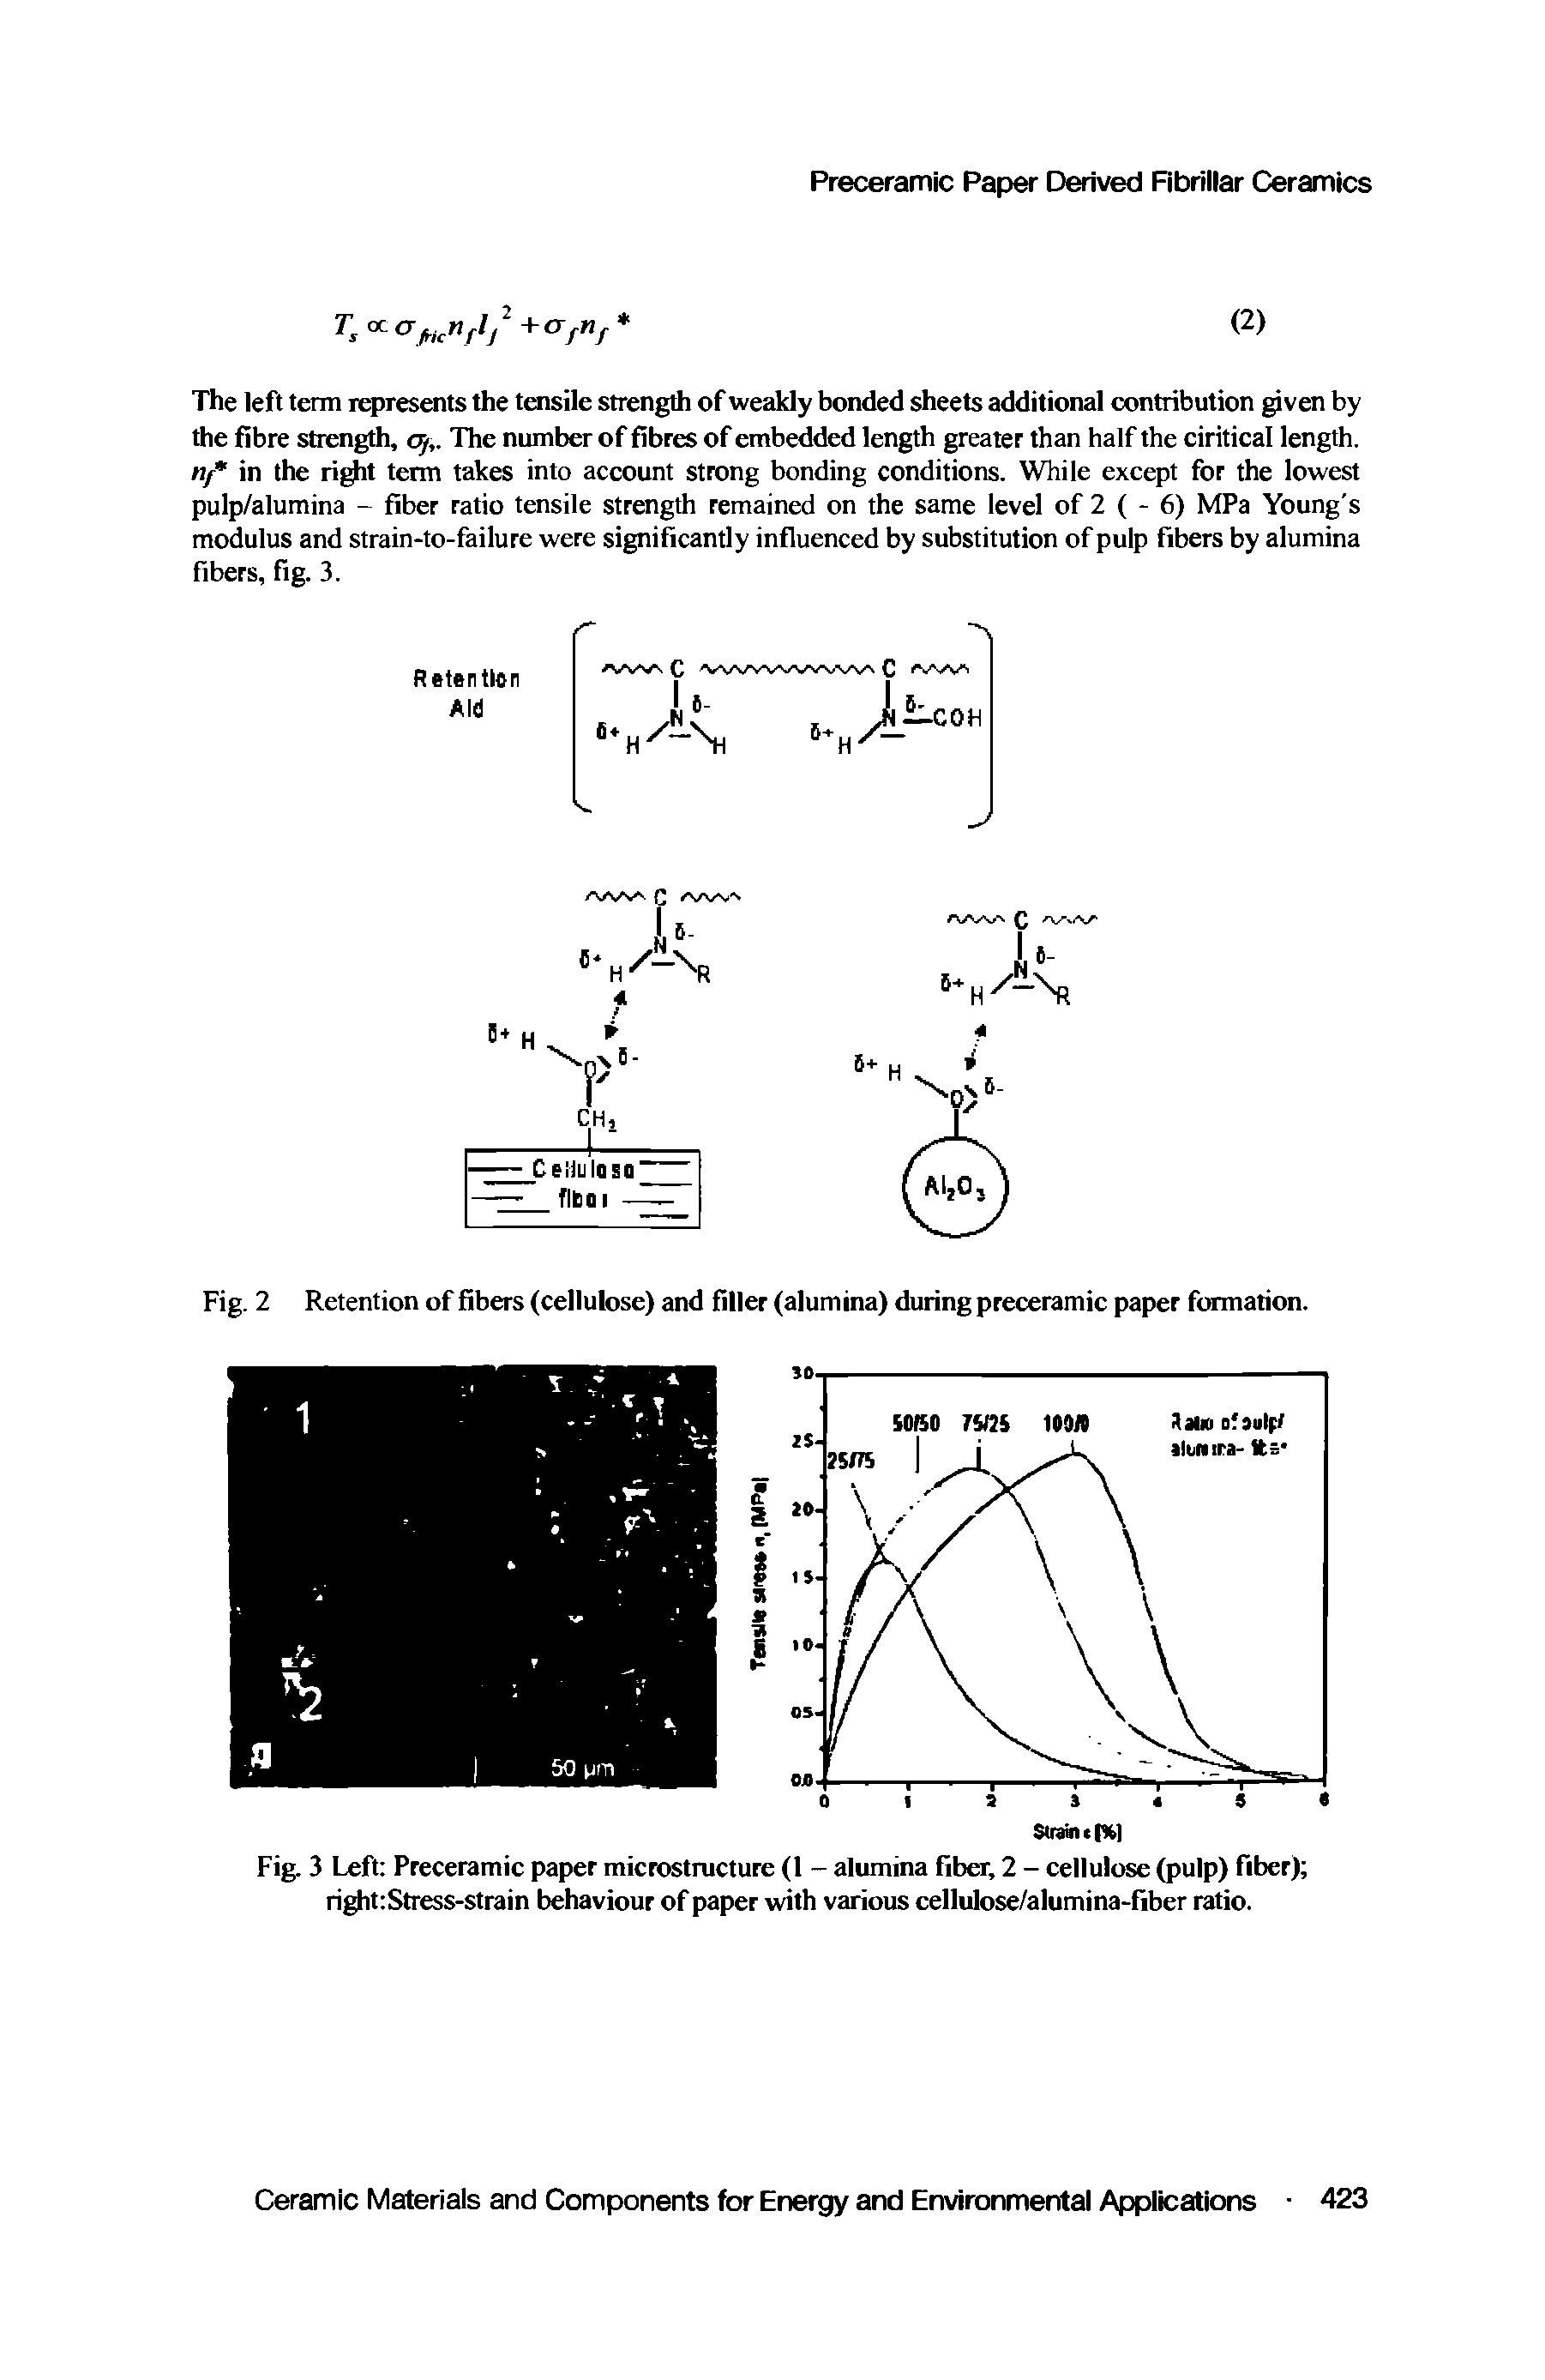 Fig. 2 Retention of fibers (cellulose) and filler (alumina) during preceramic paper formation.